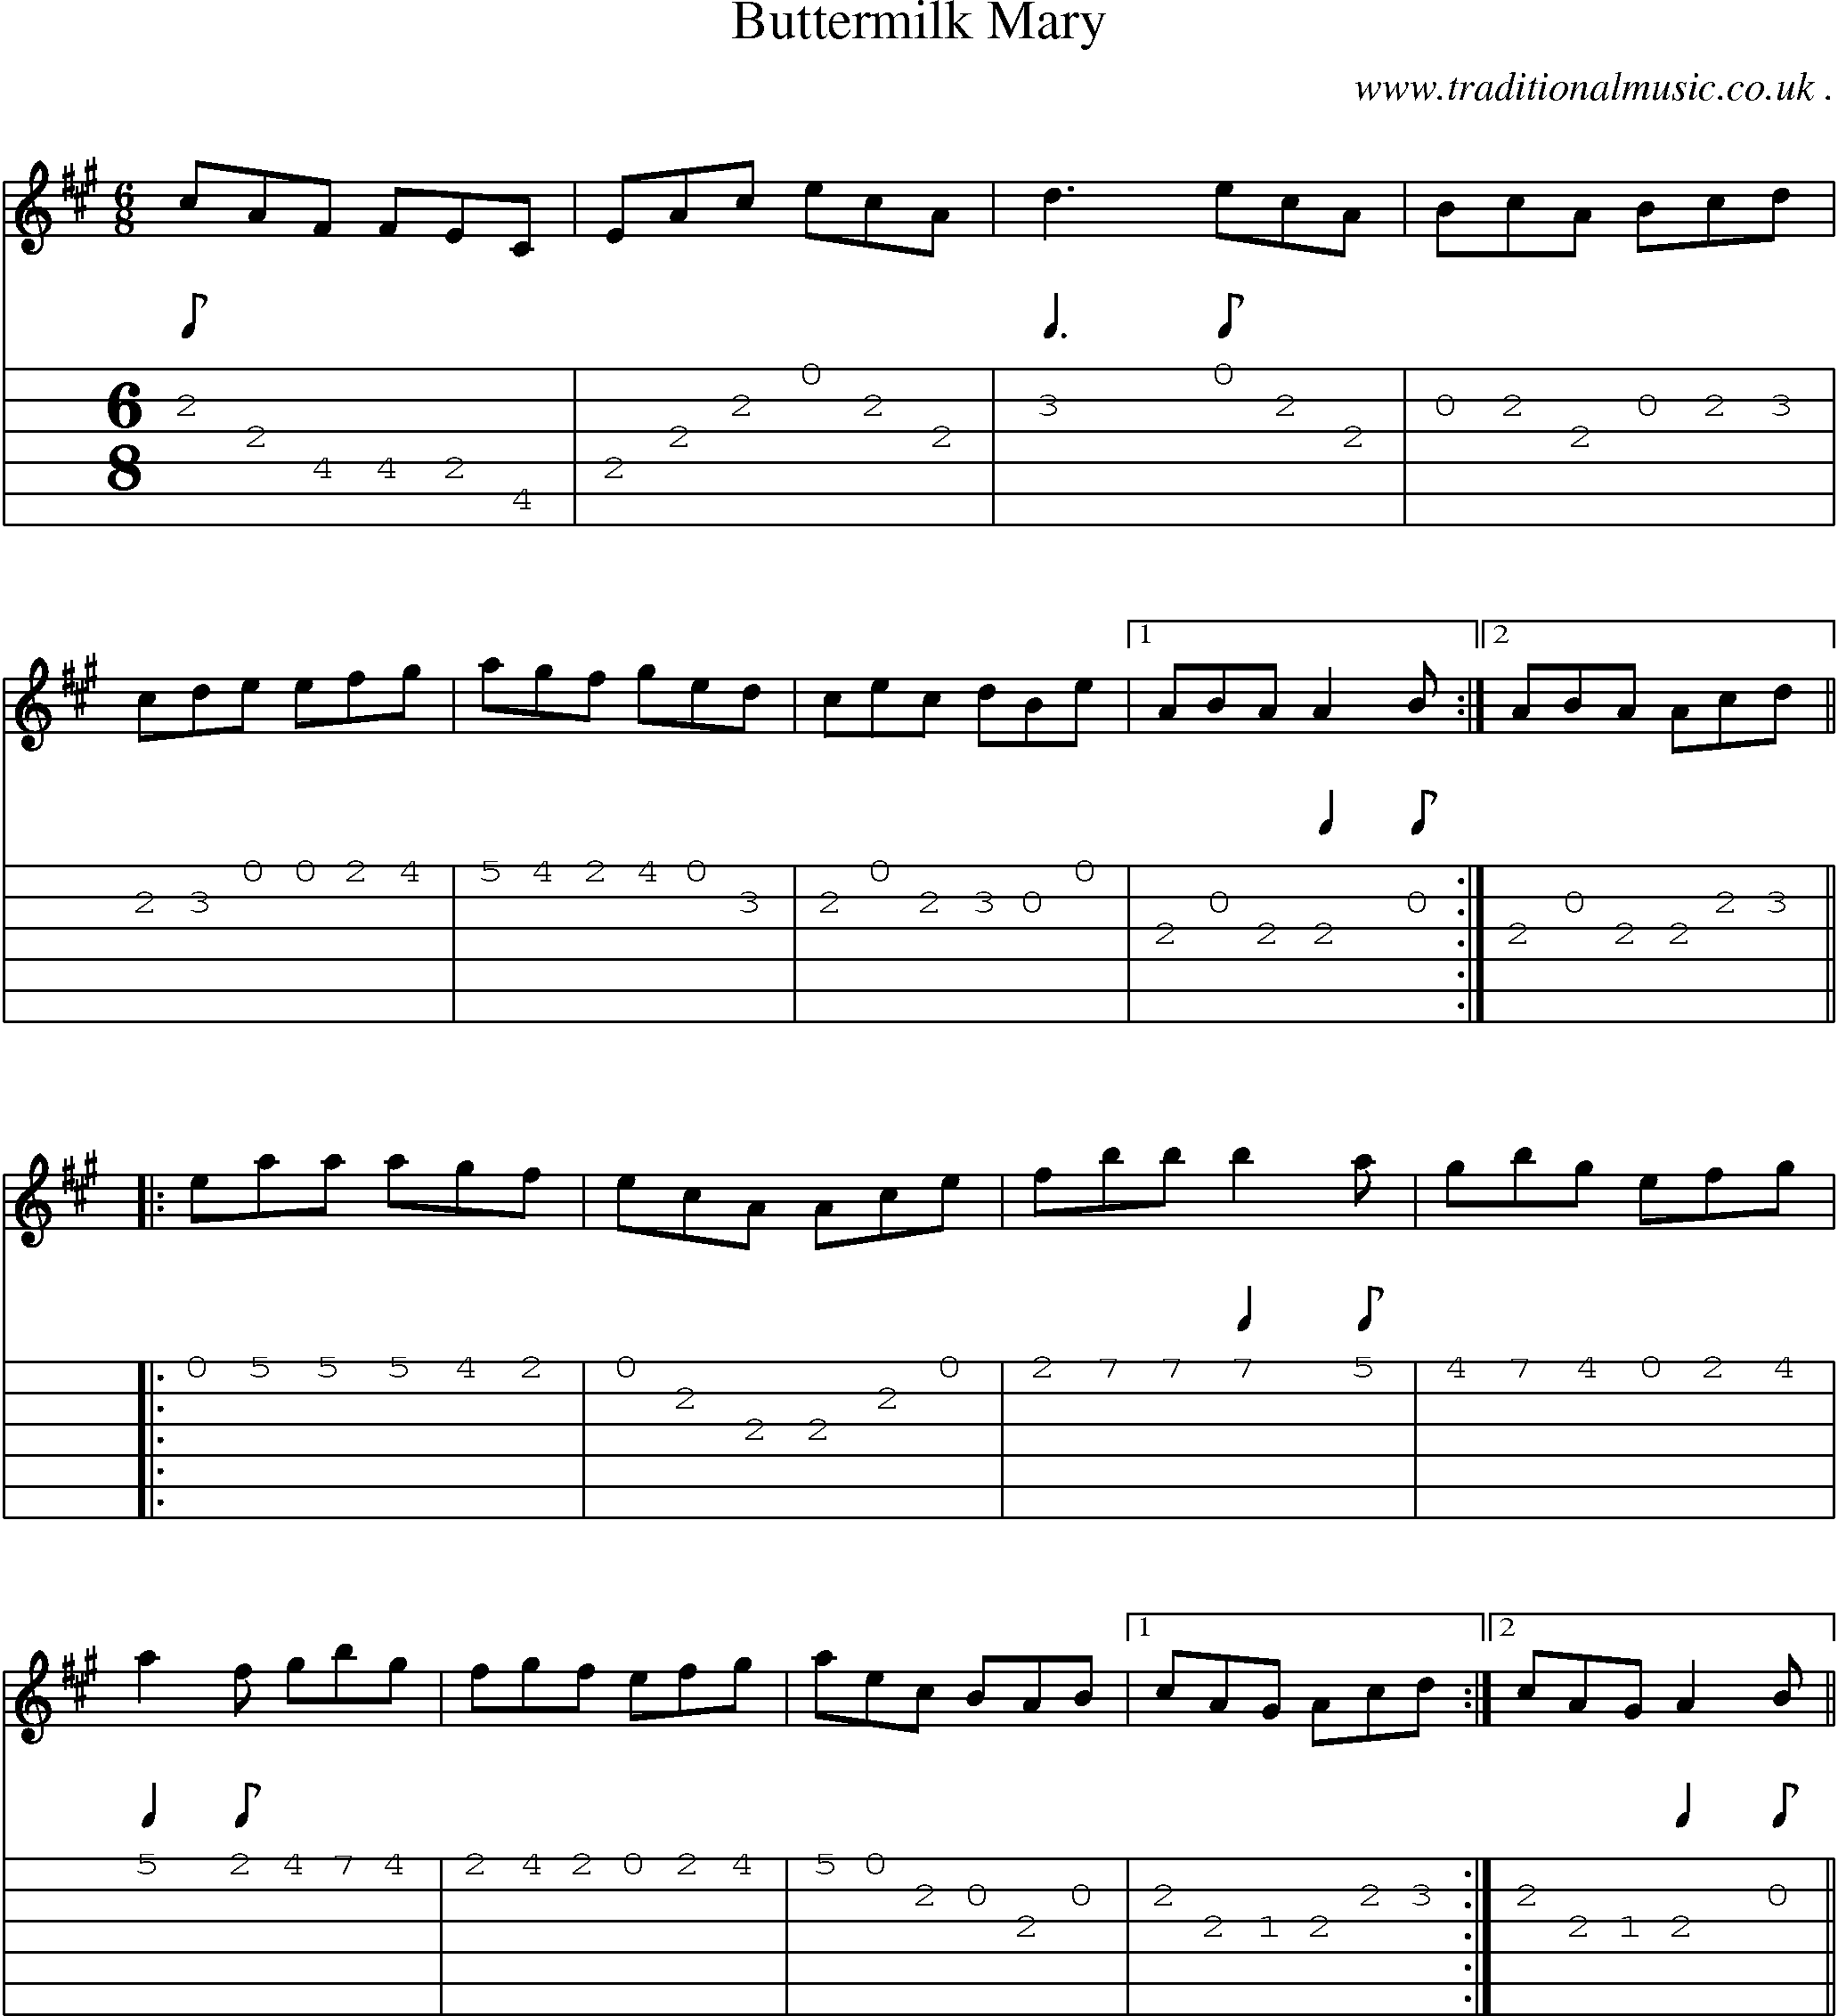 Sheet-Music and Guitar Tabs for Buttermilk Mary